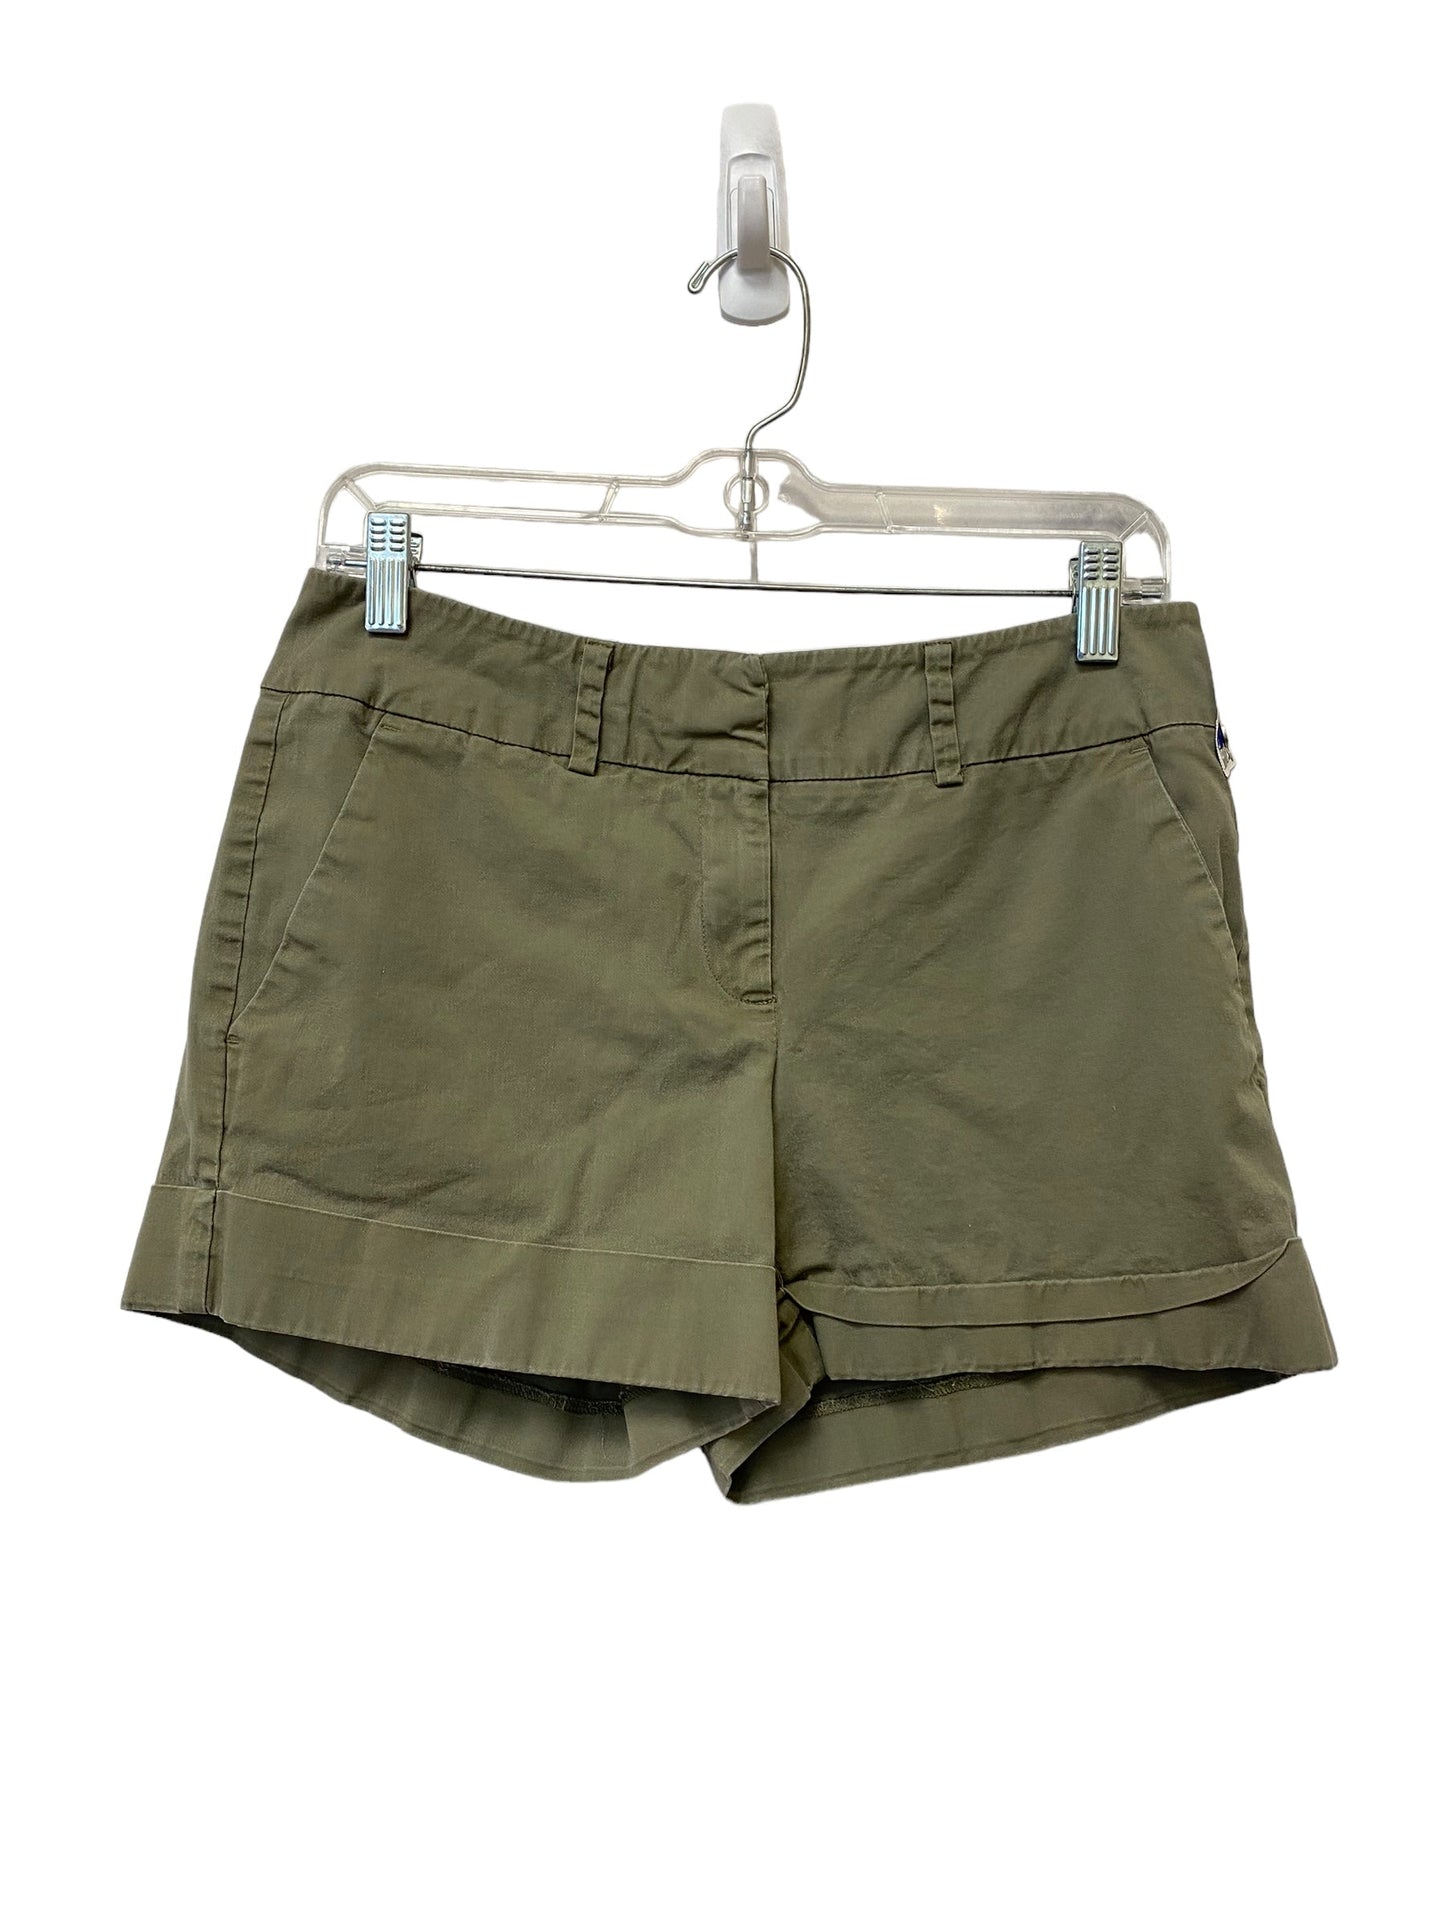 Green Shorts New York And Co, Size 6